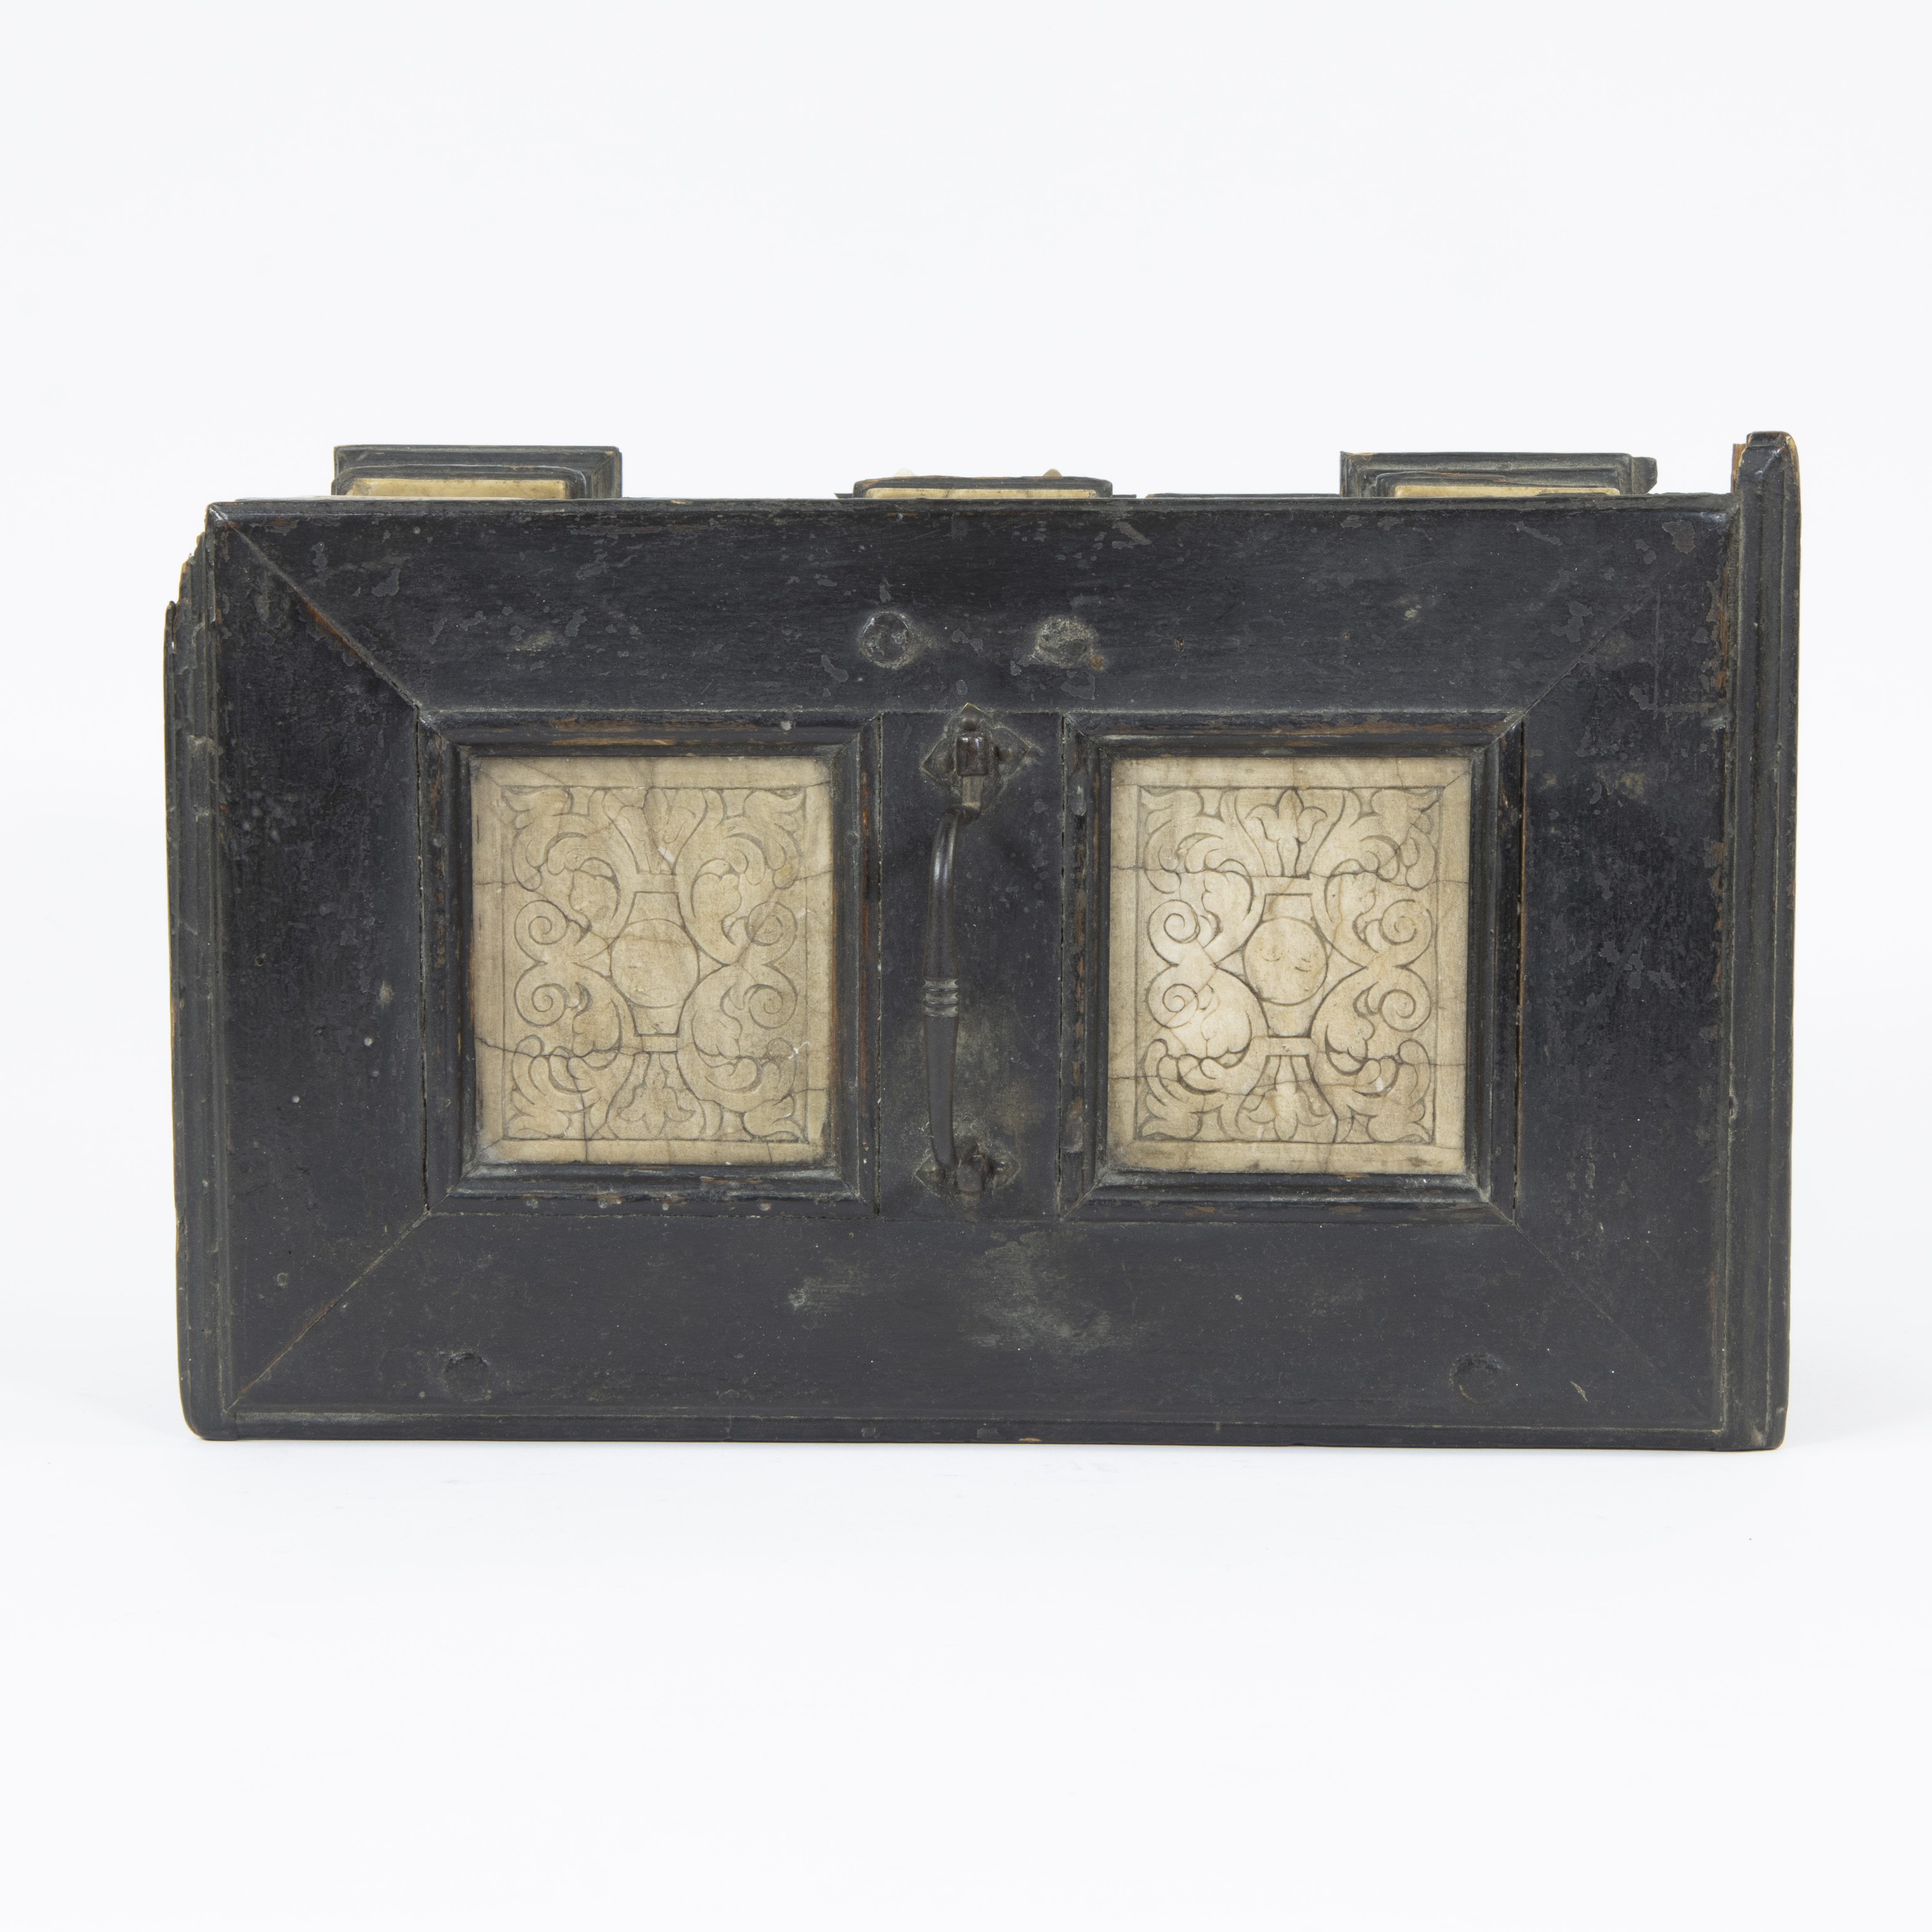 An early 17th century ebonised and alabaster table casket, Malines, circa 1630 - Image 6 of 6